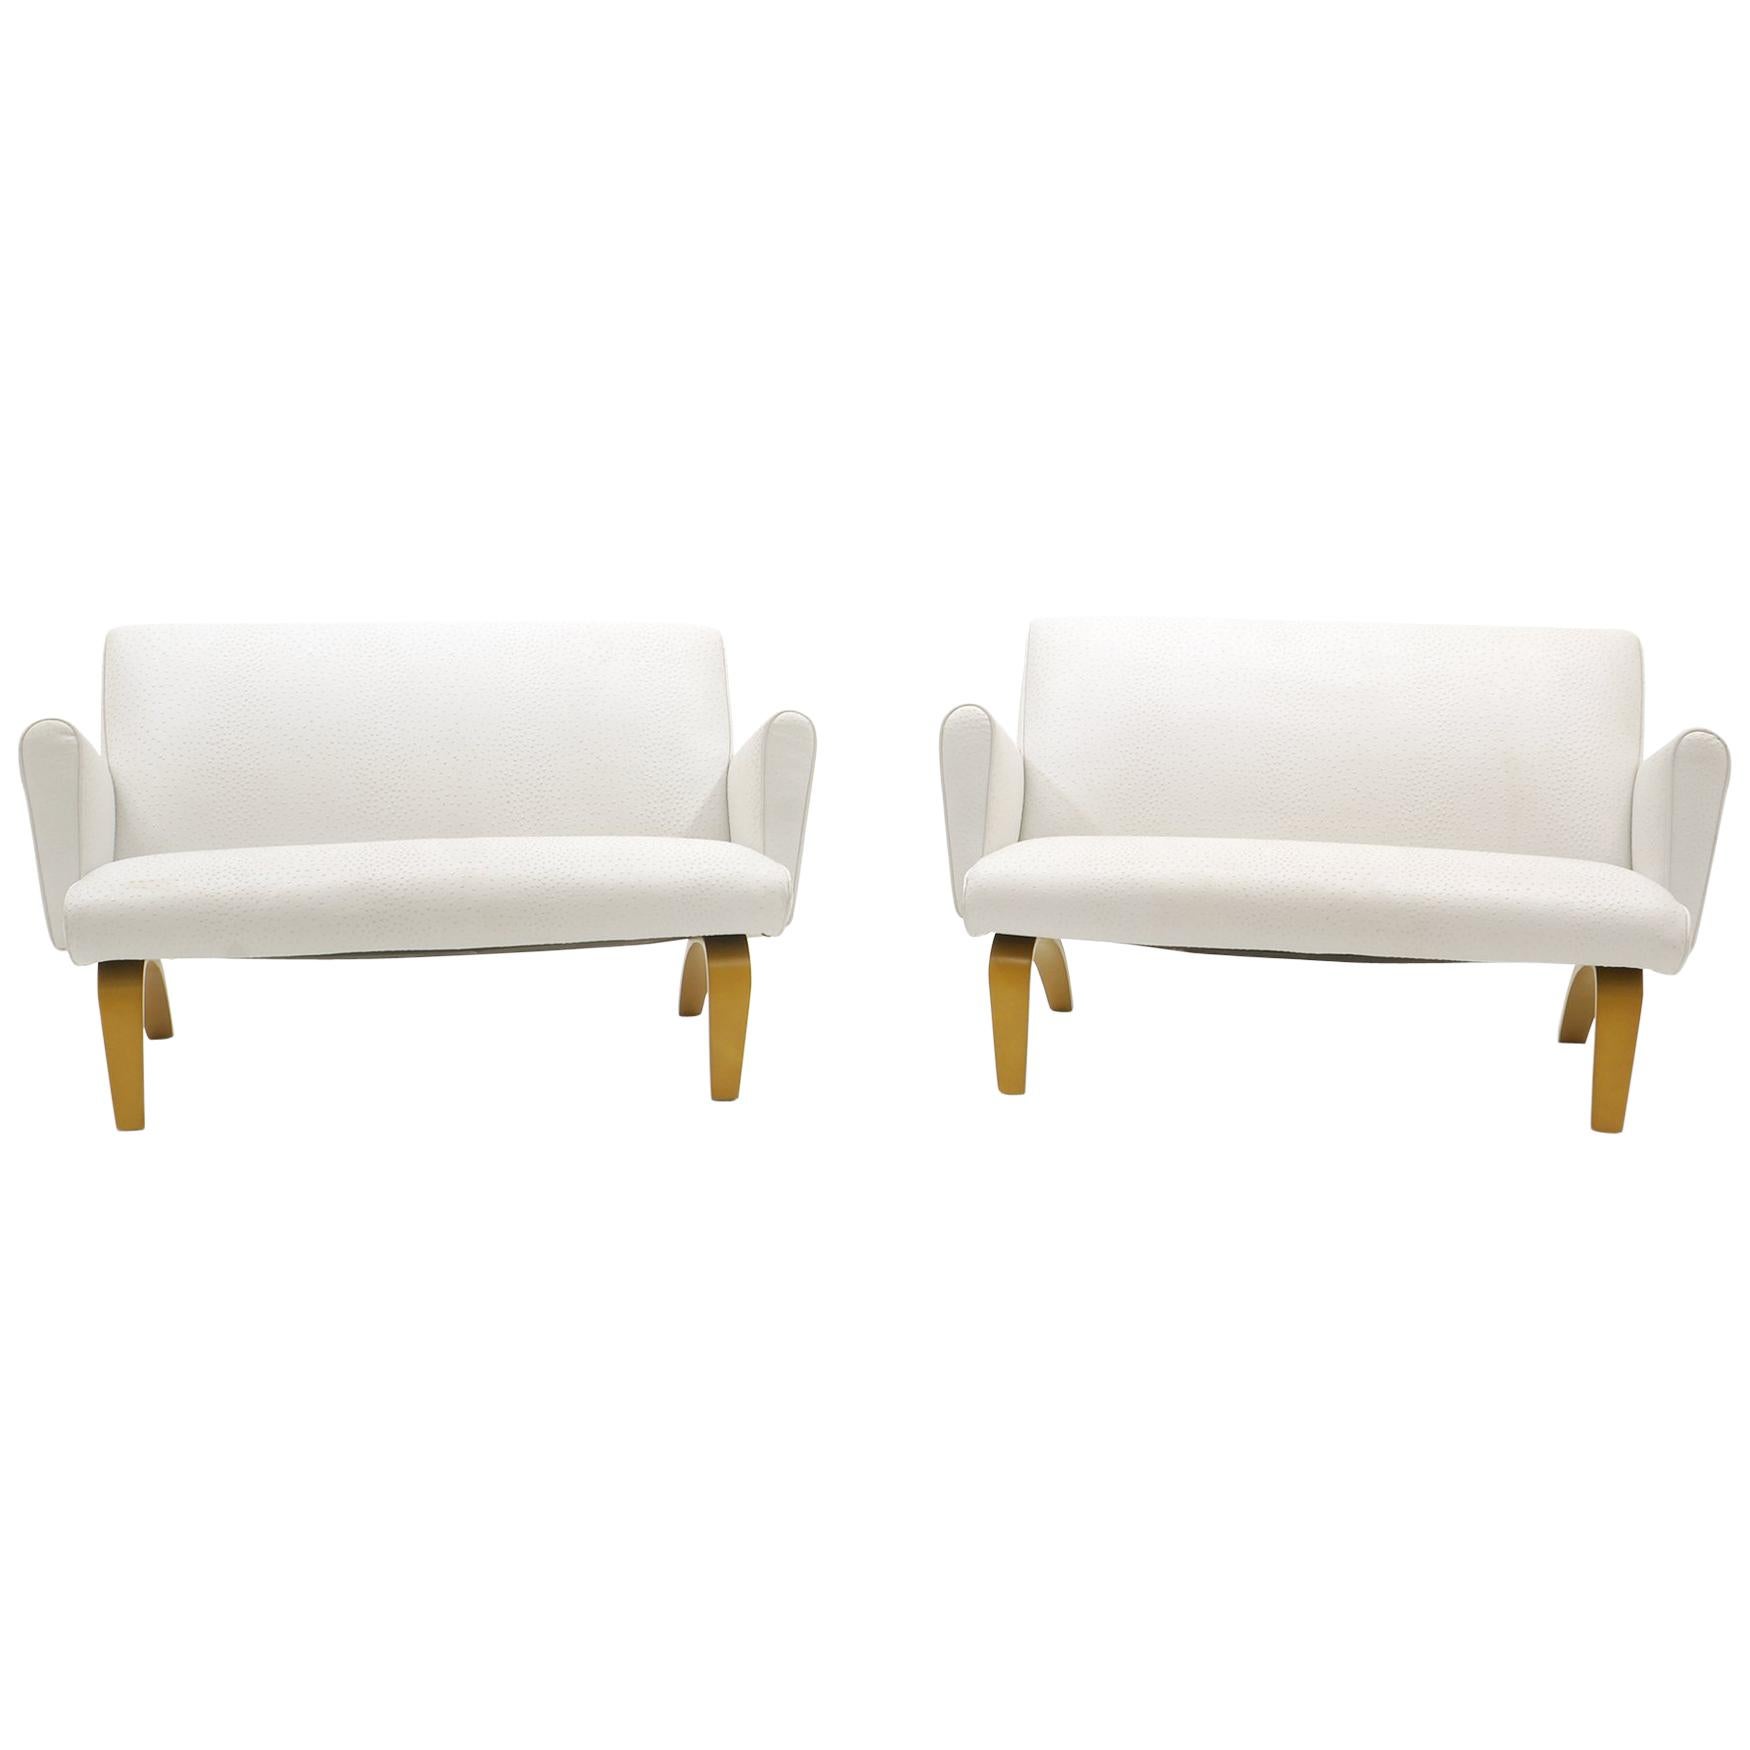 Pair of Loveseats / Settees with Arms by Thonet